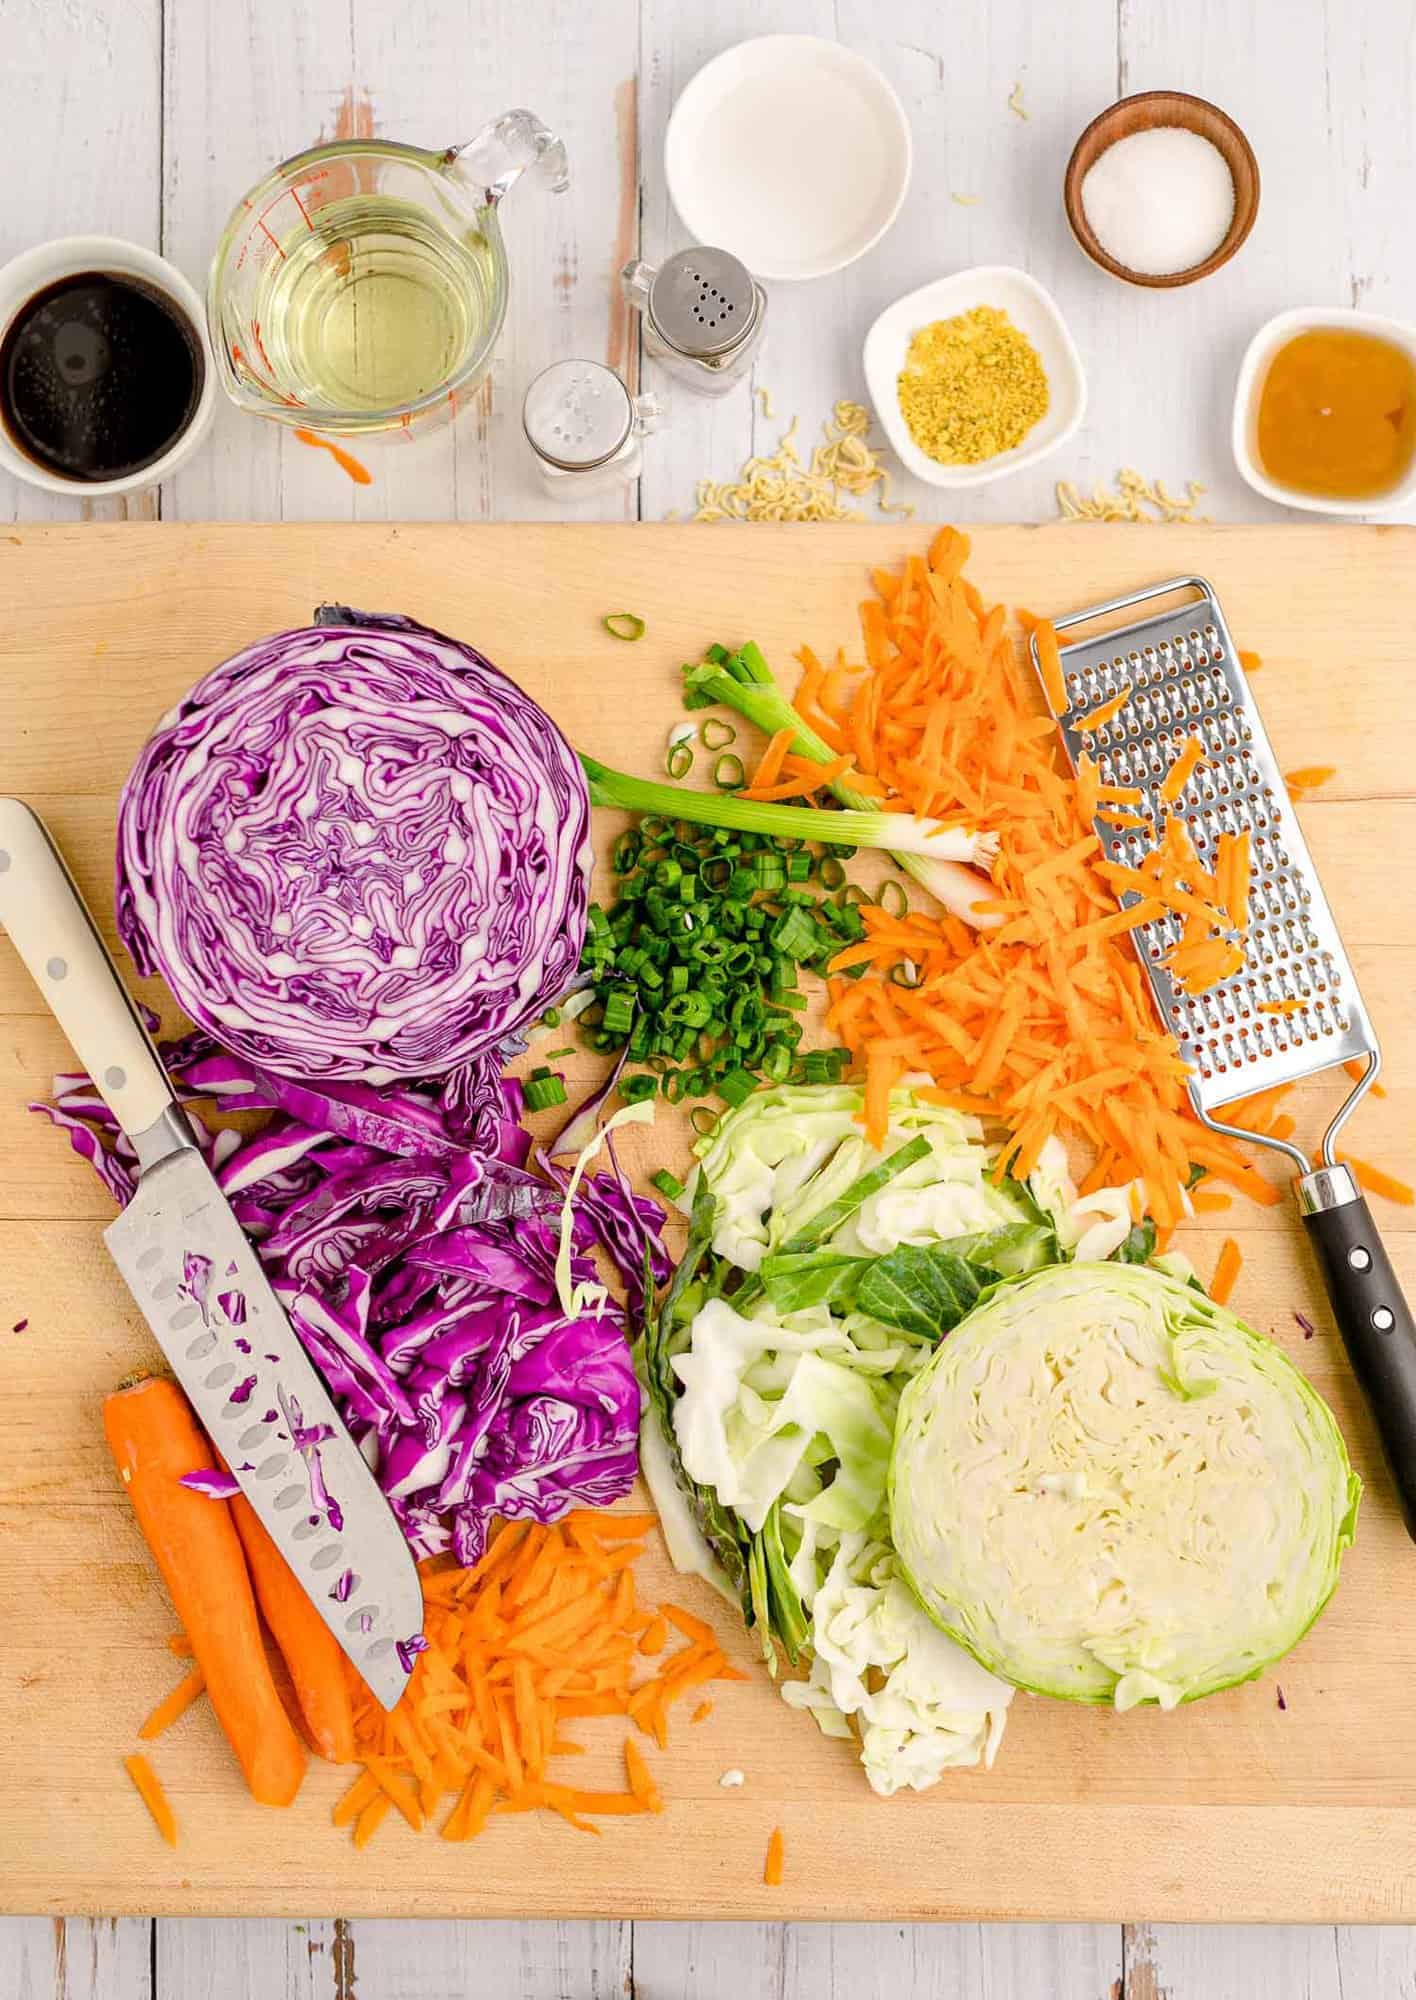 Shredded vegetables, a knife, and a grater.